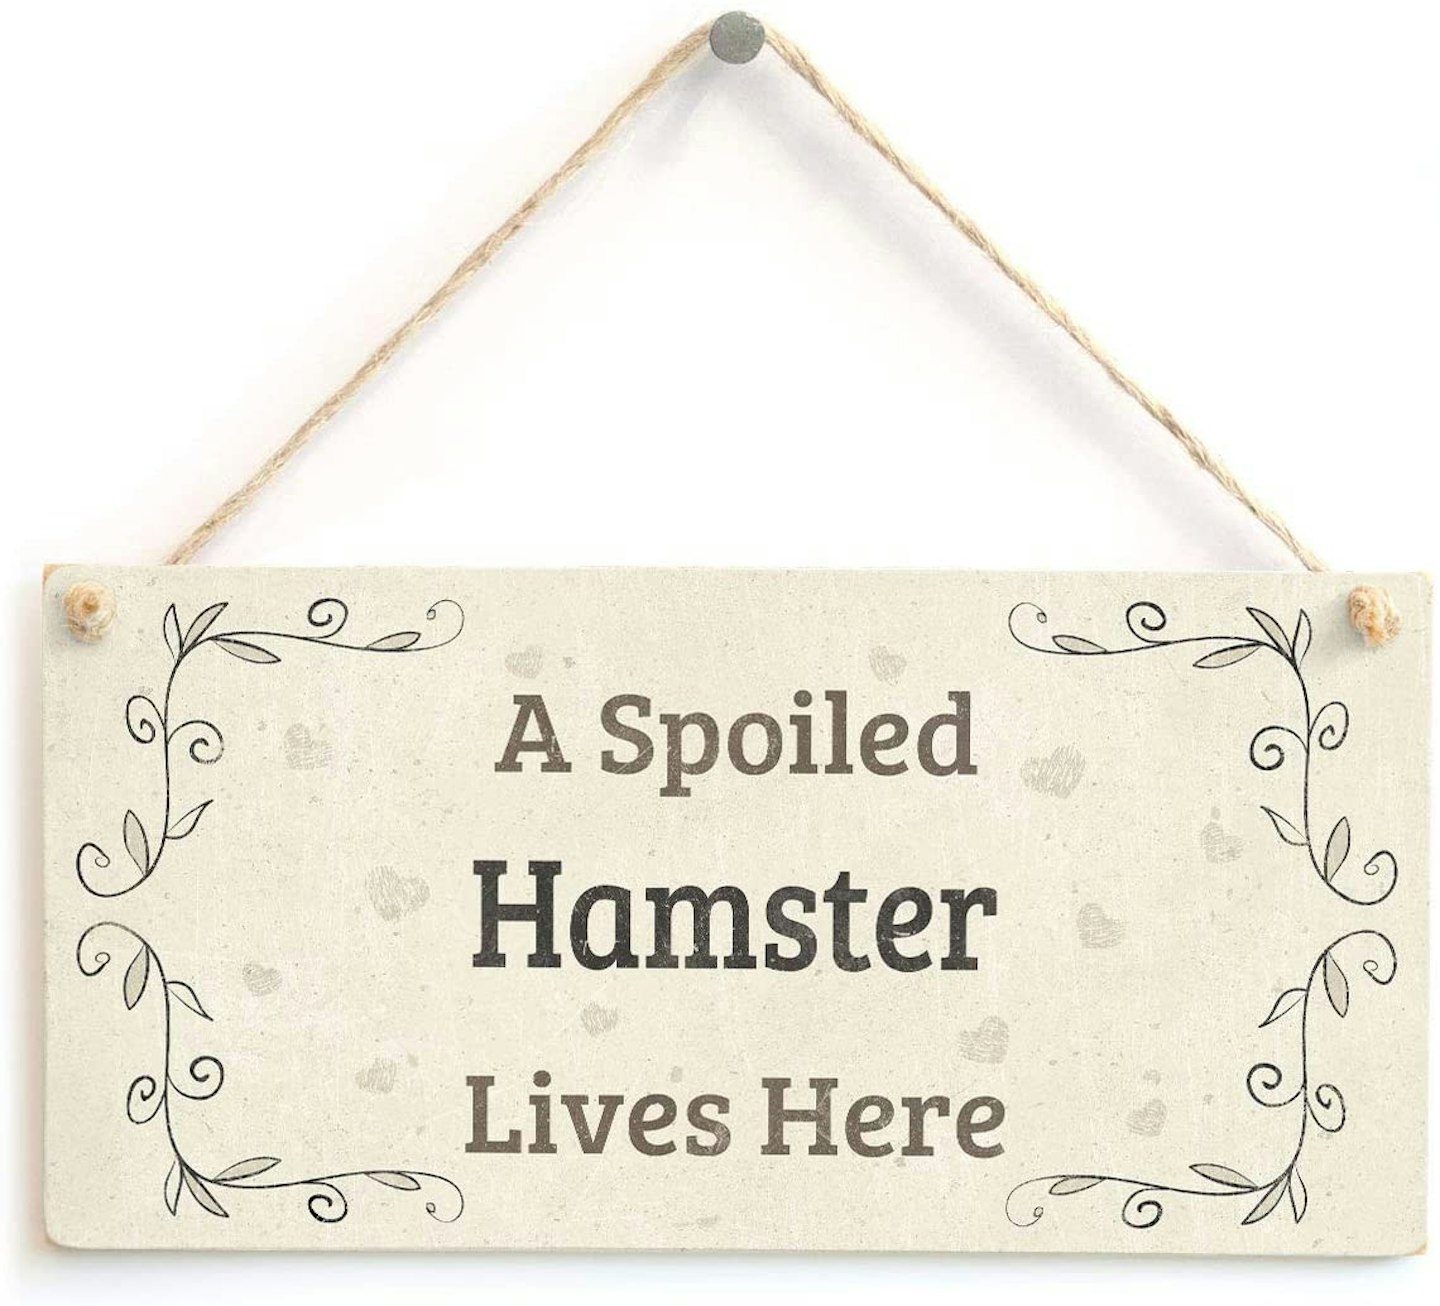 A Spoiled Hamster Lives Here - Button Hill Cottage Sign